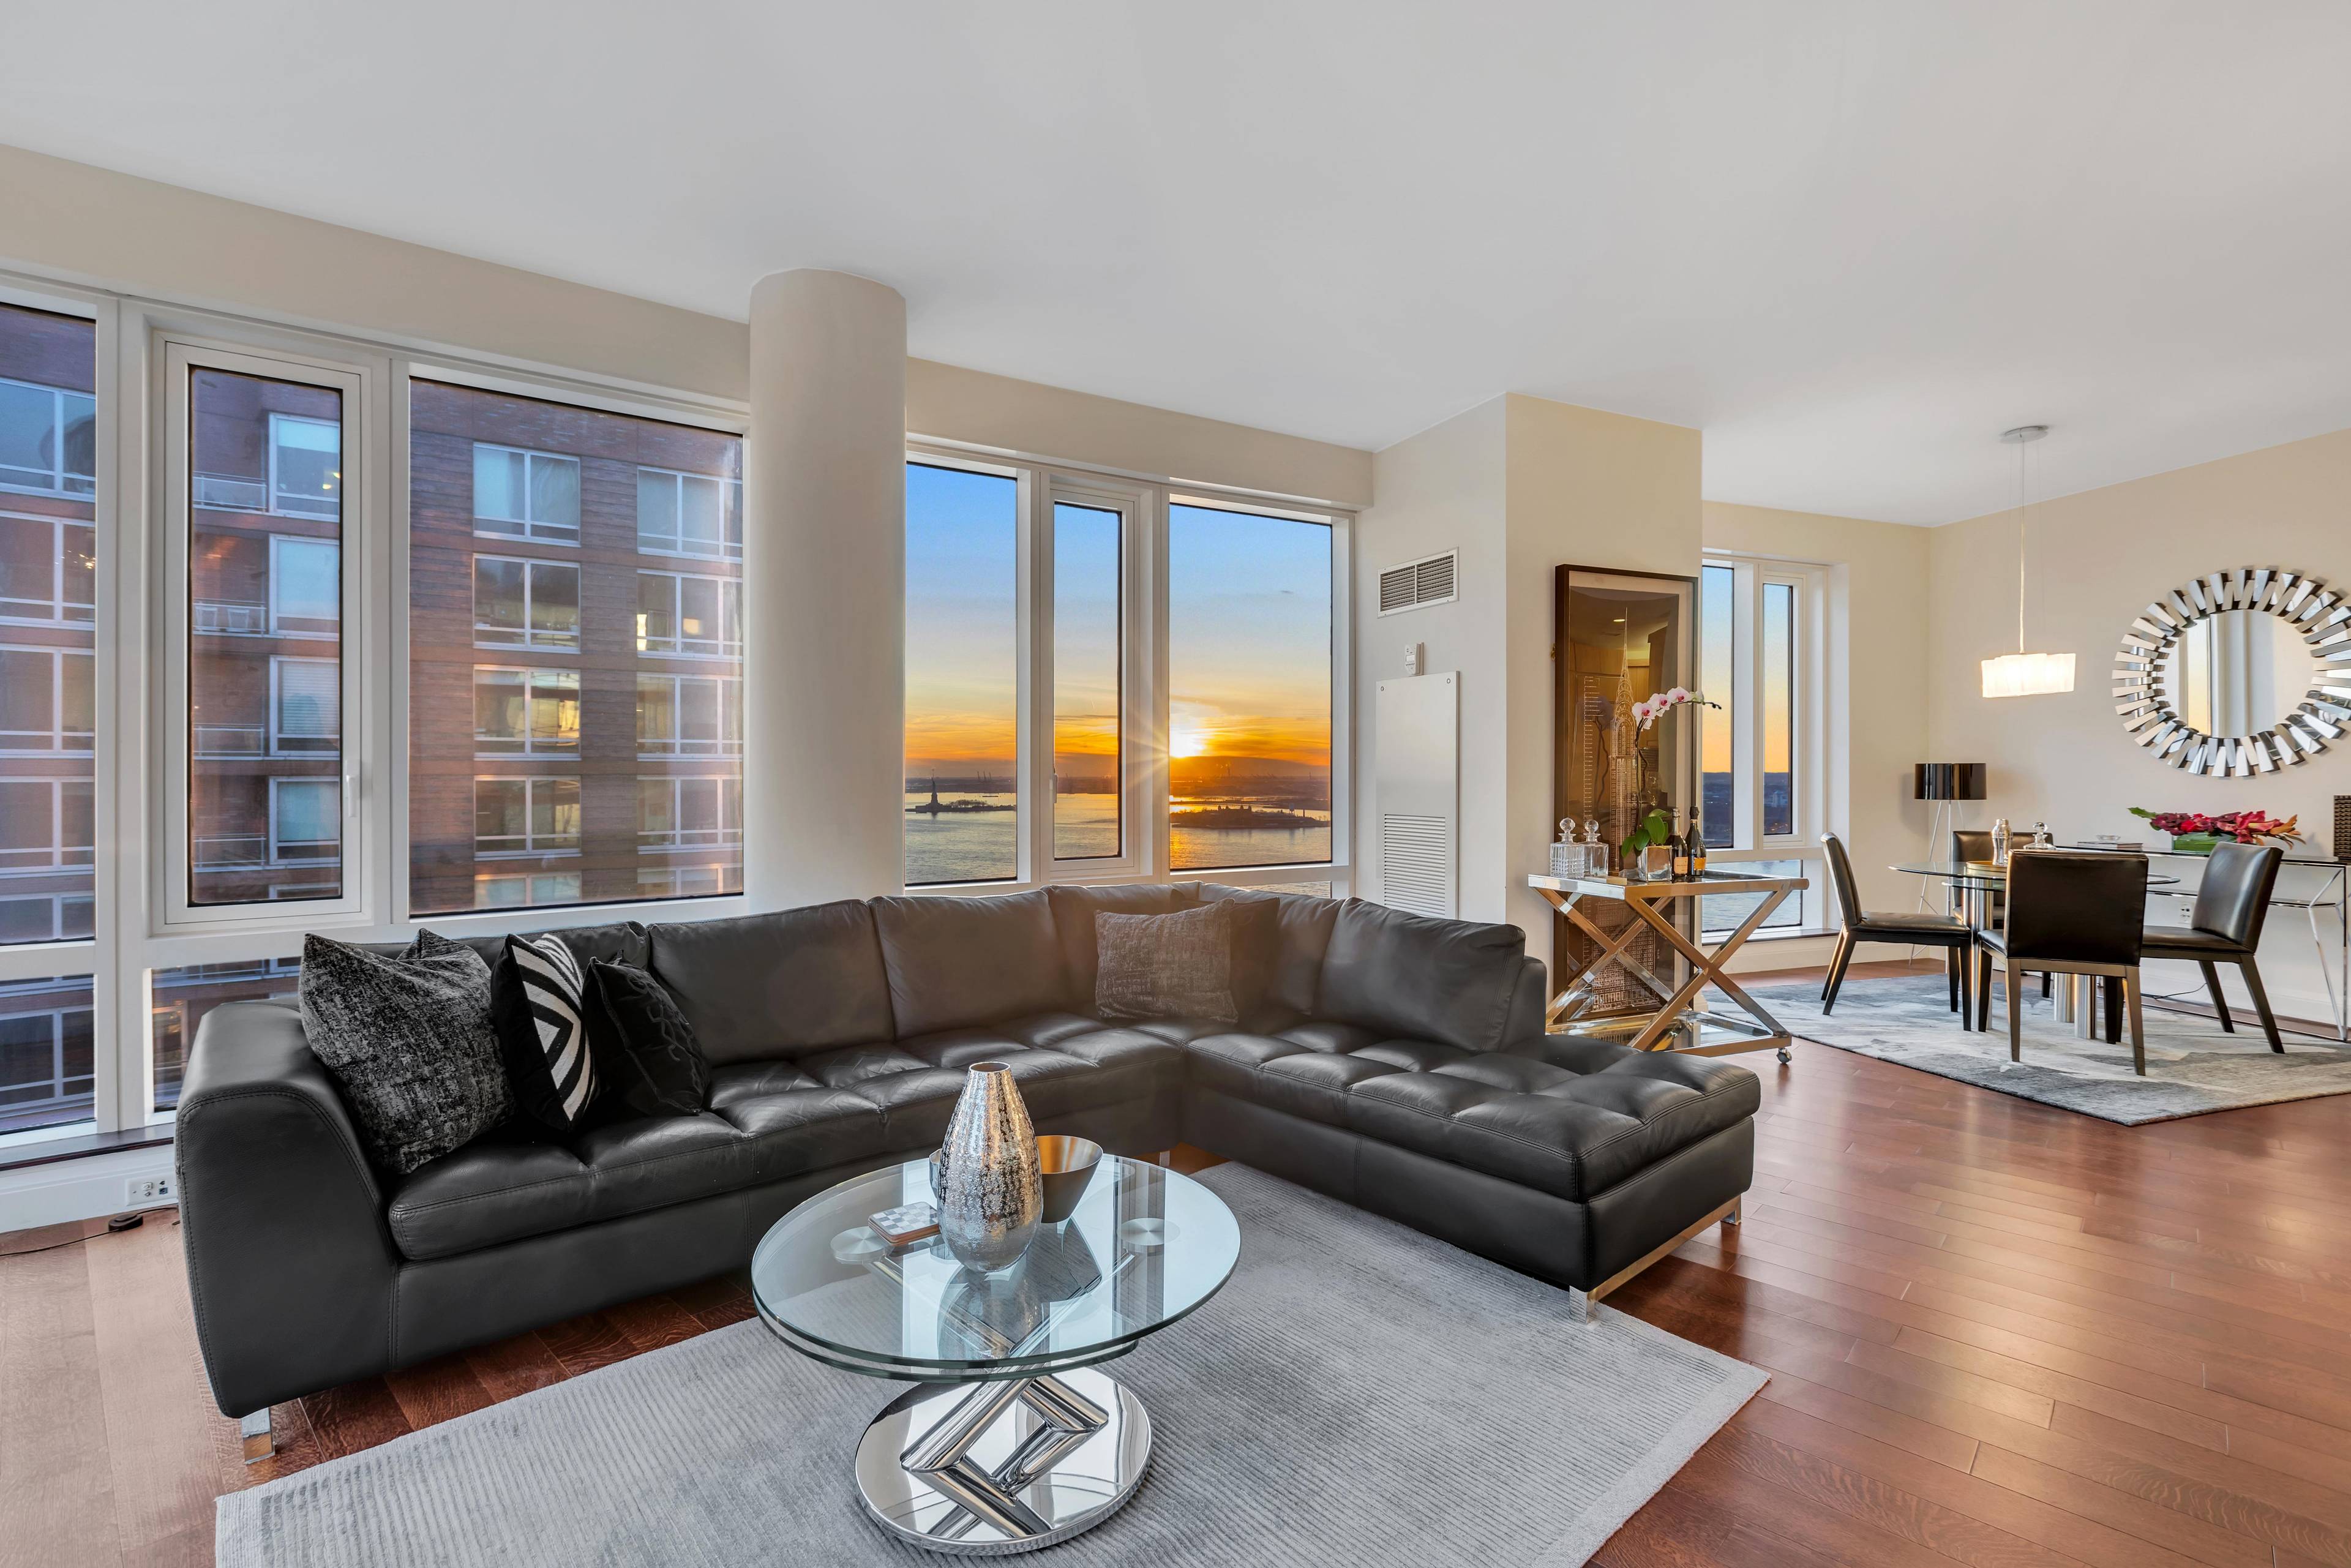 Corner 3 Bedroom At The Visionaire With Direct River and Statue of Liberty Views